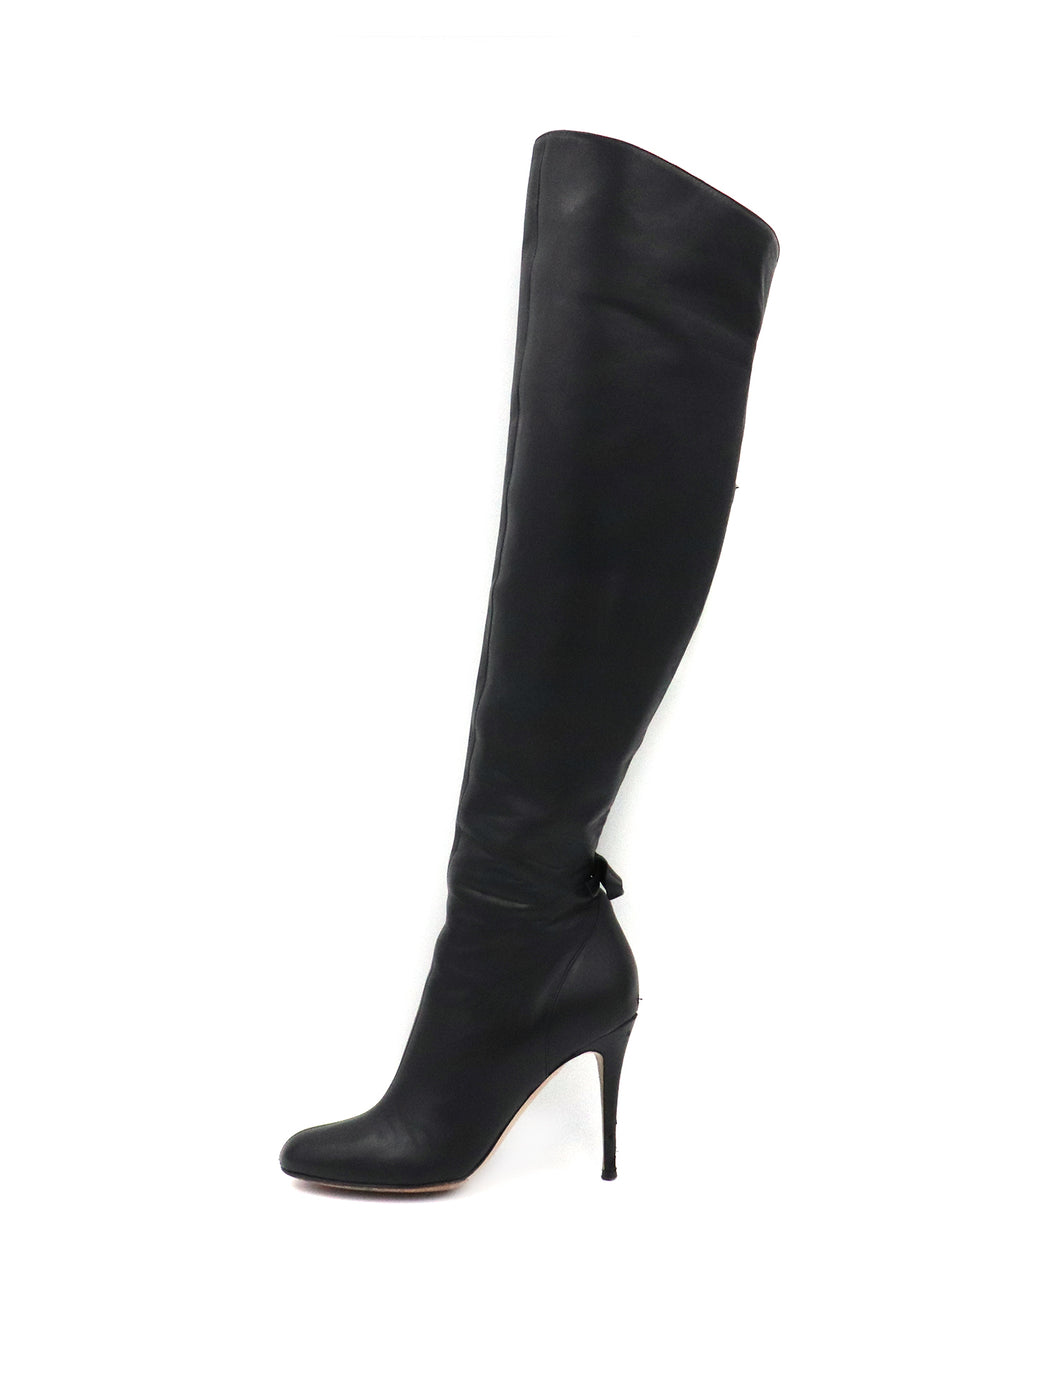 Valentino Bow Over-The-Knee Stiletto Boots